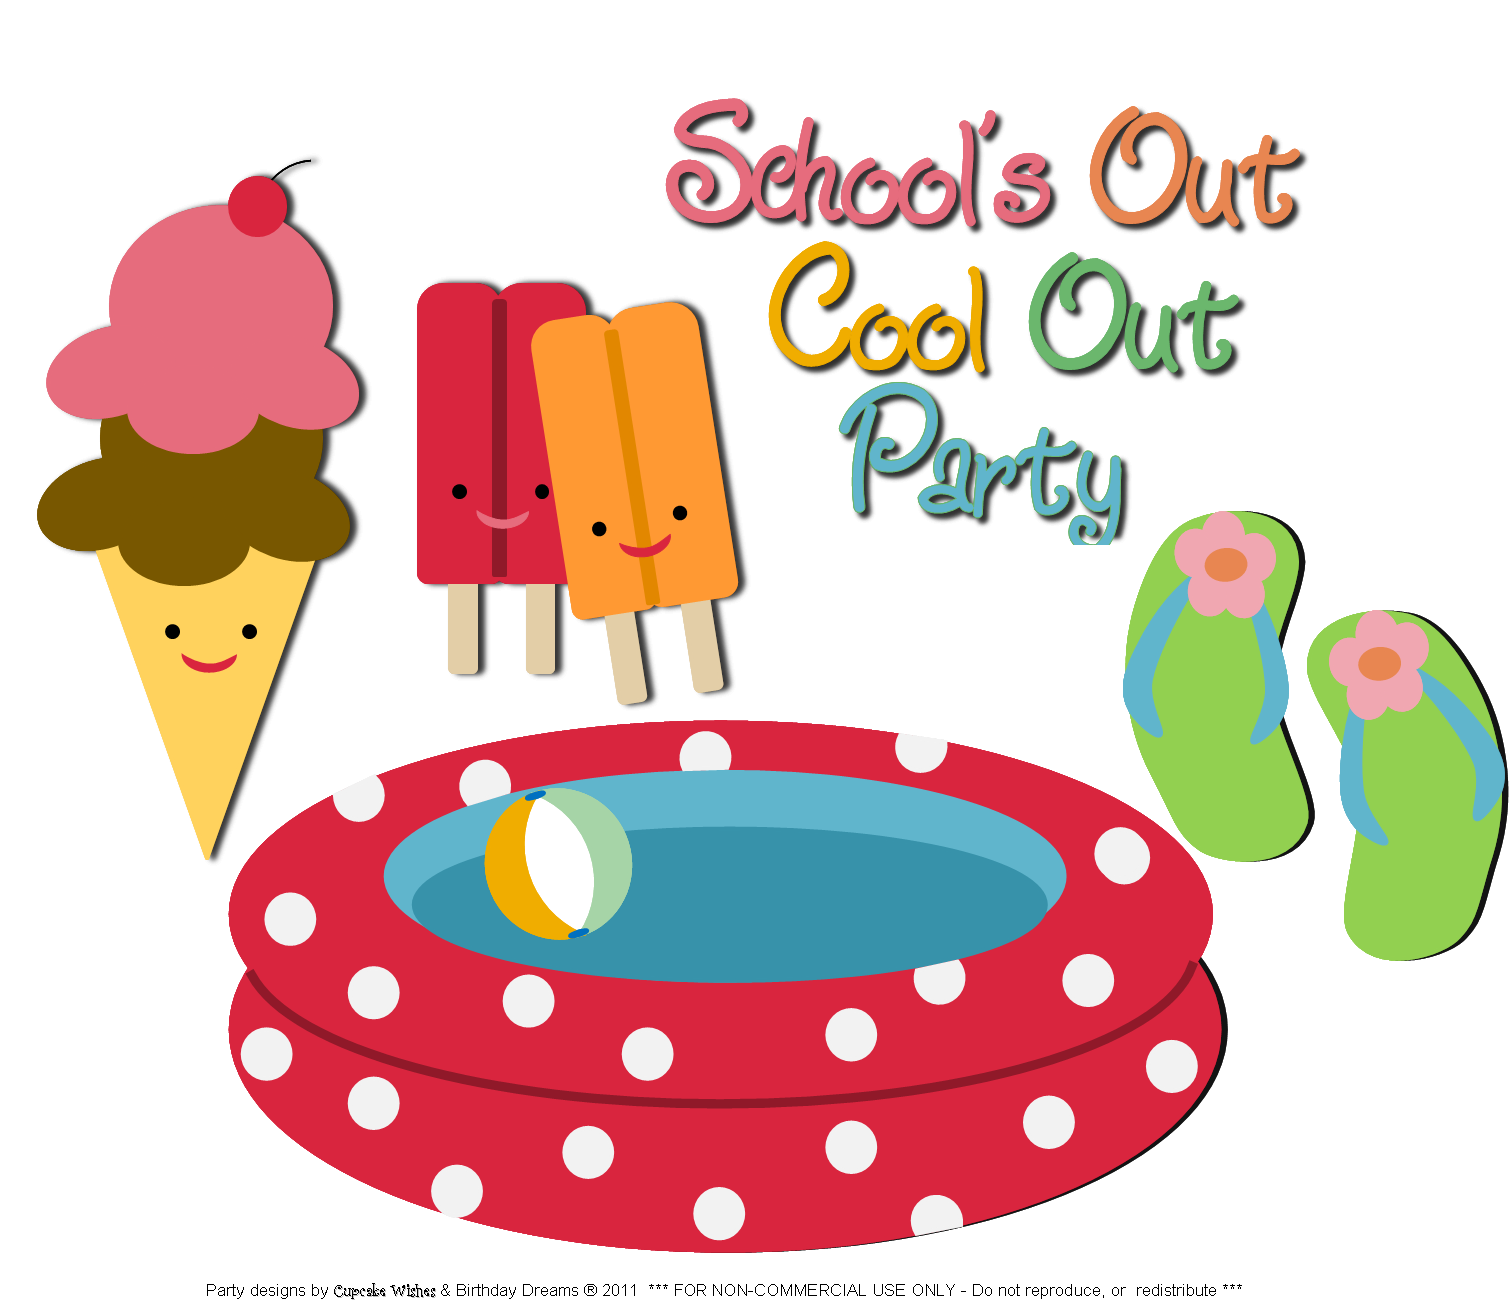 Schools out party clipart jpg